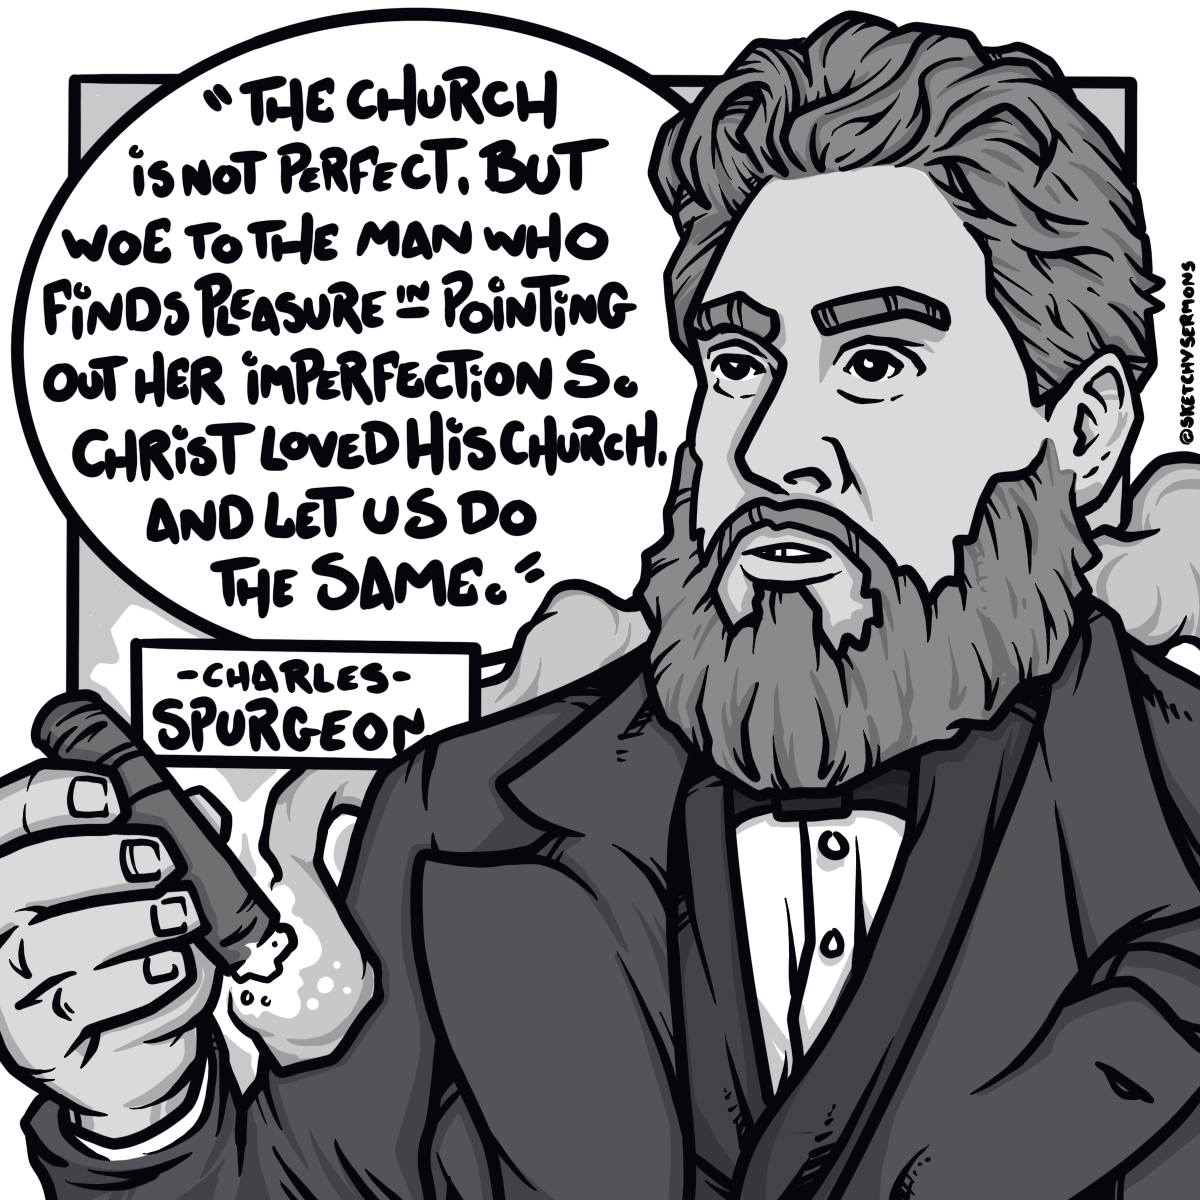 Charles Spurgeon and the Church